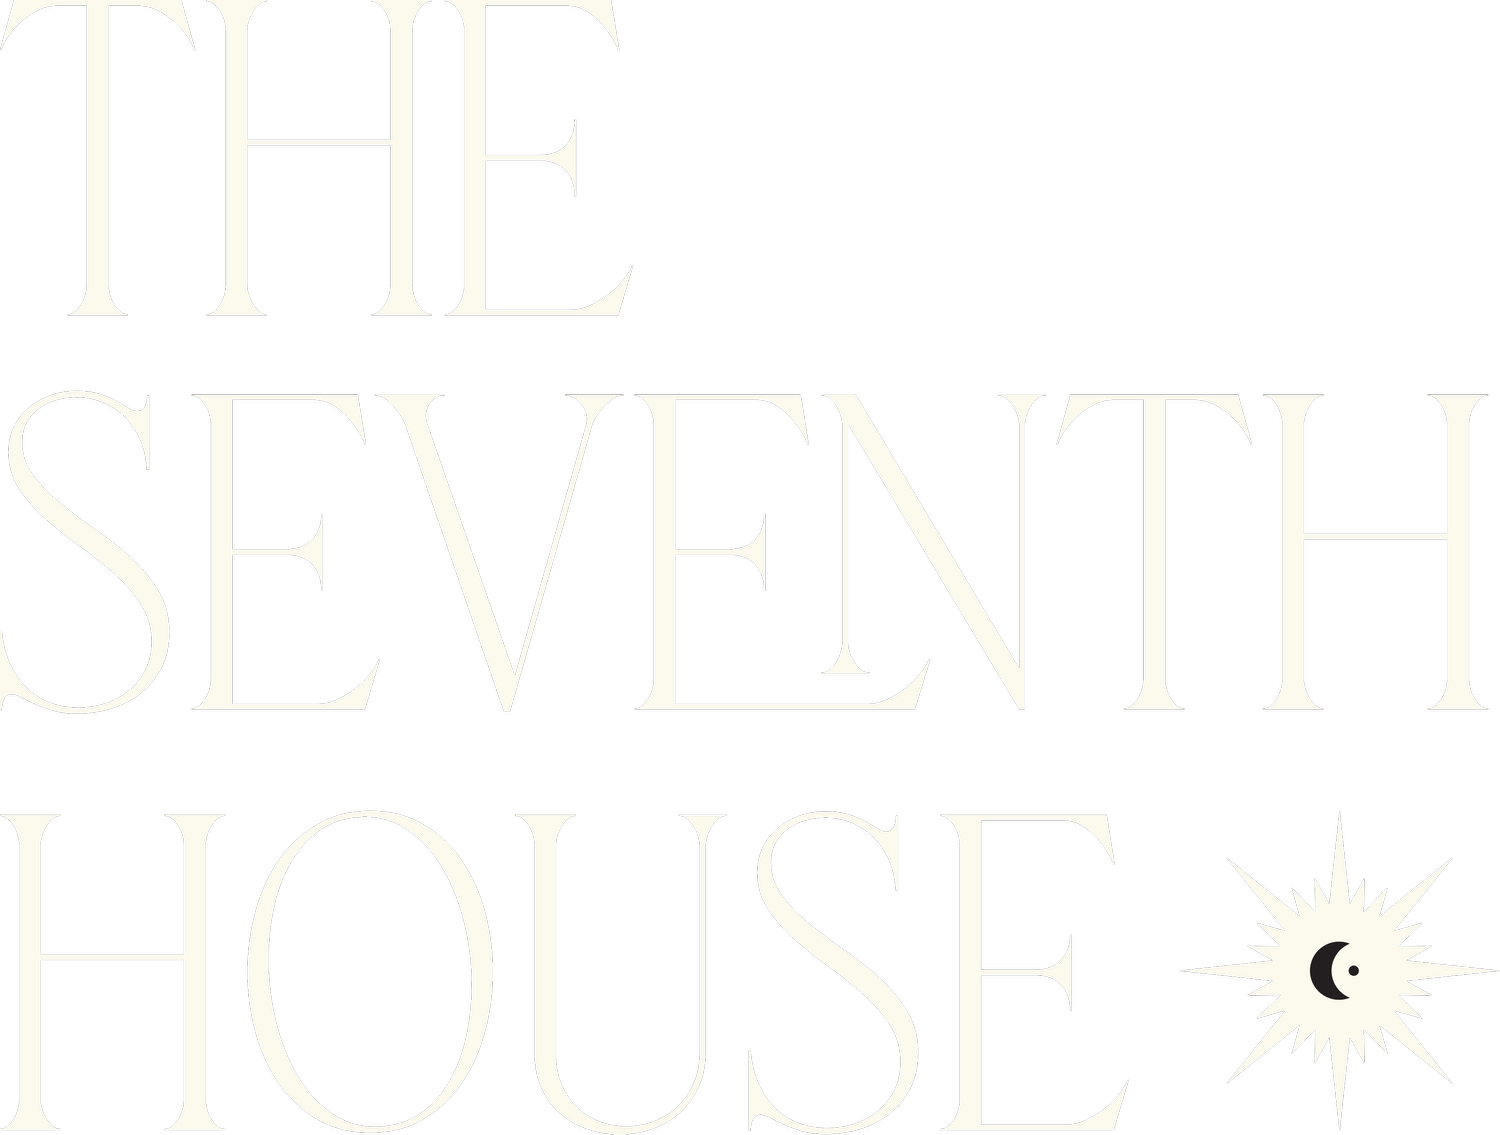 The Seventh House